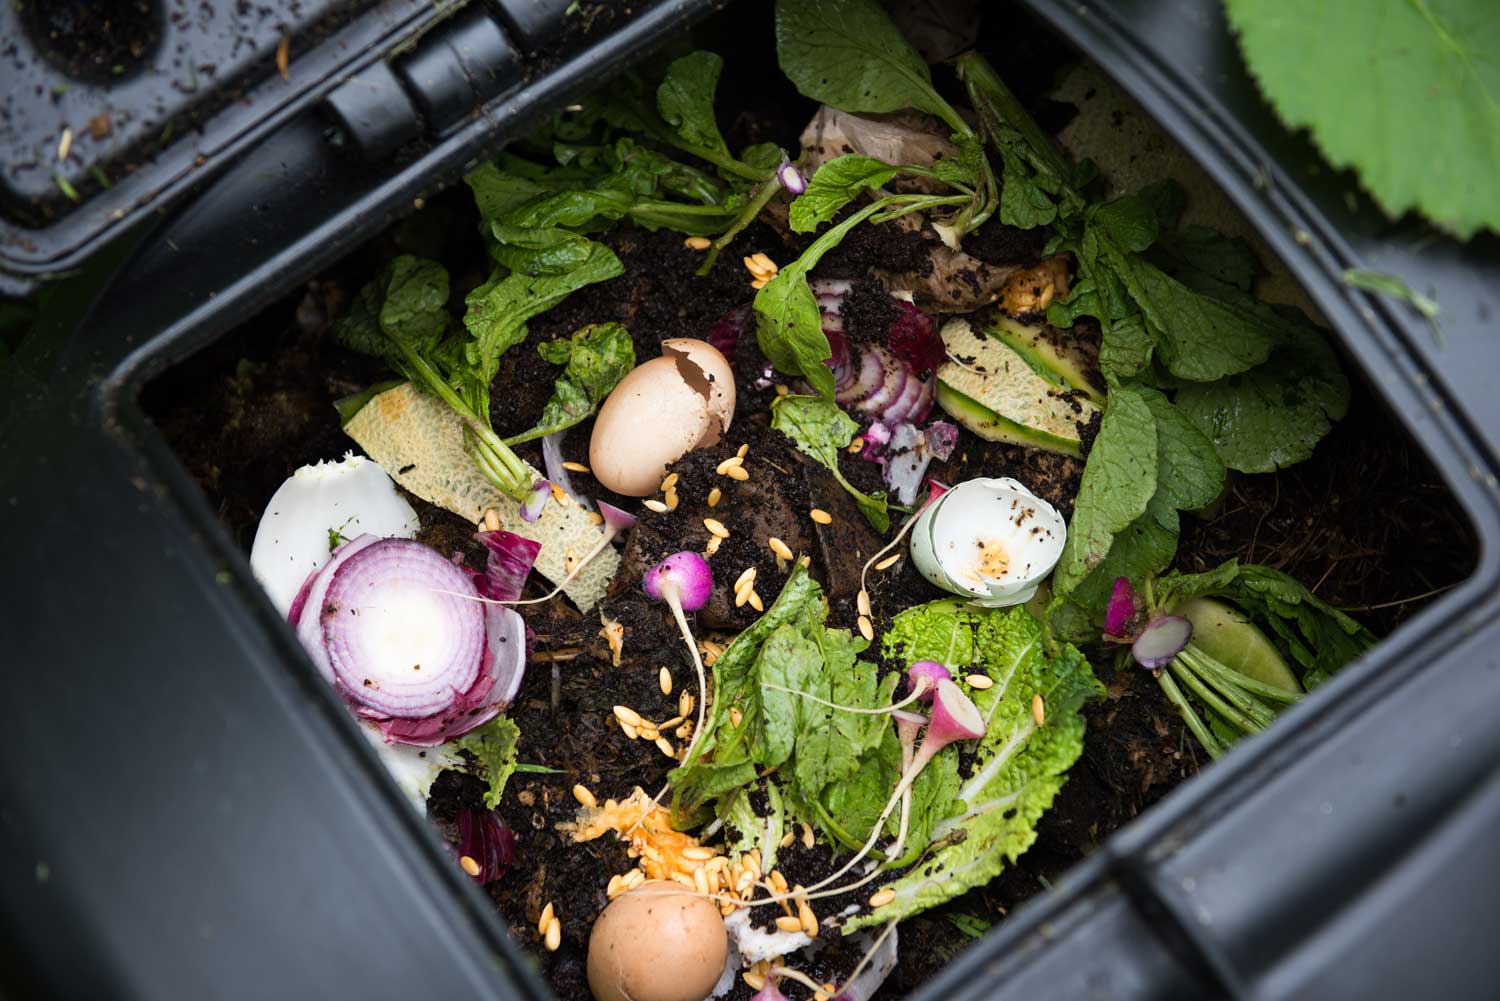 Food and compost inside a compost bin.